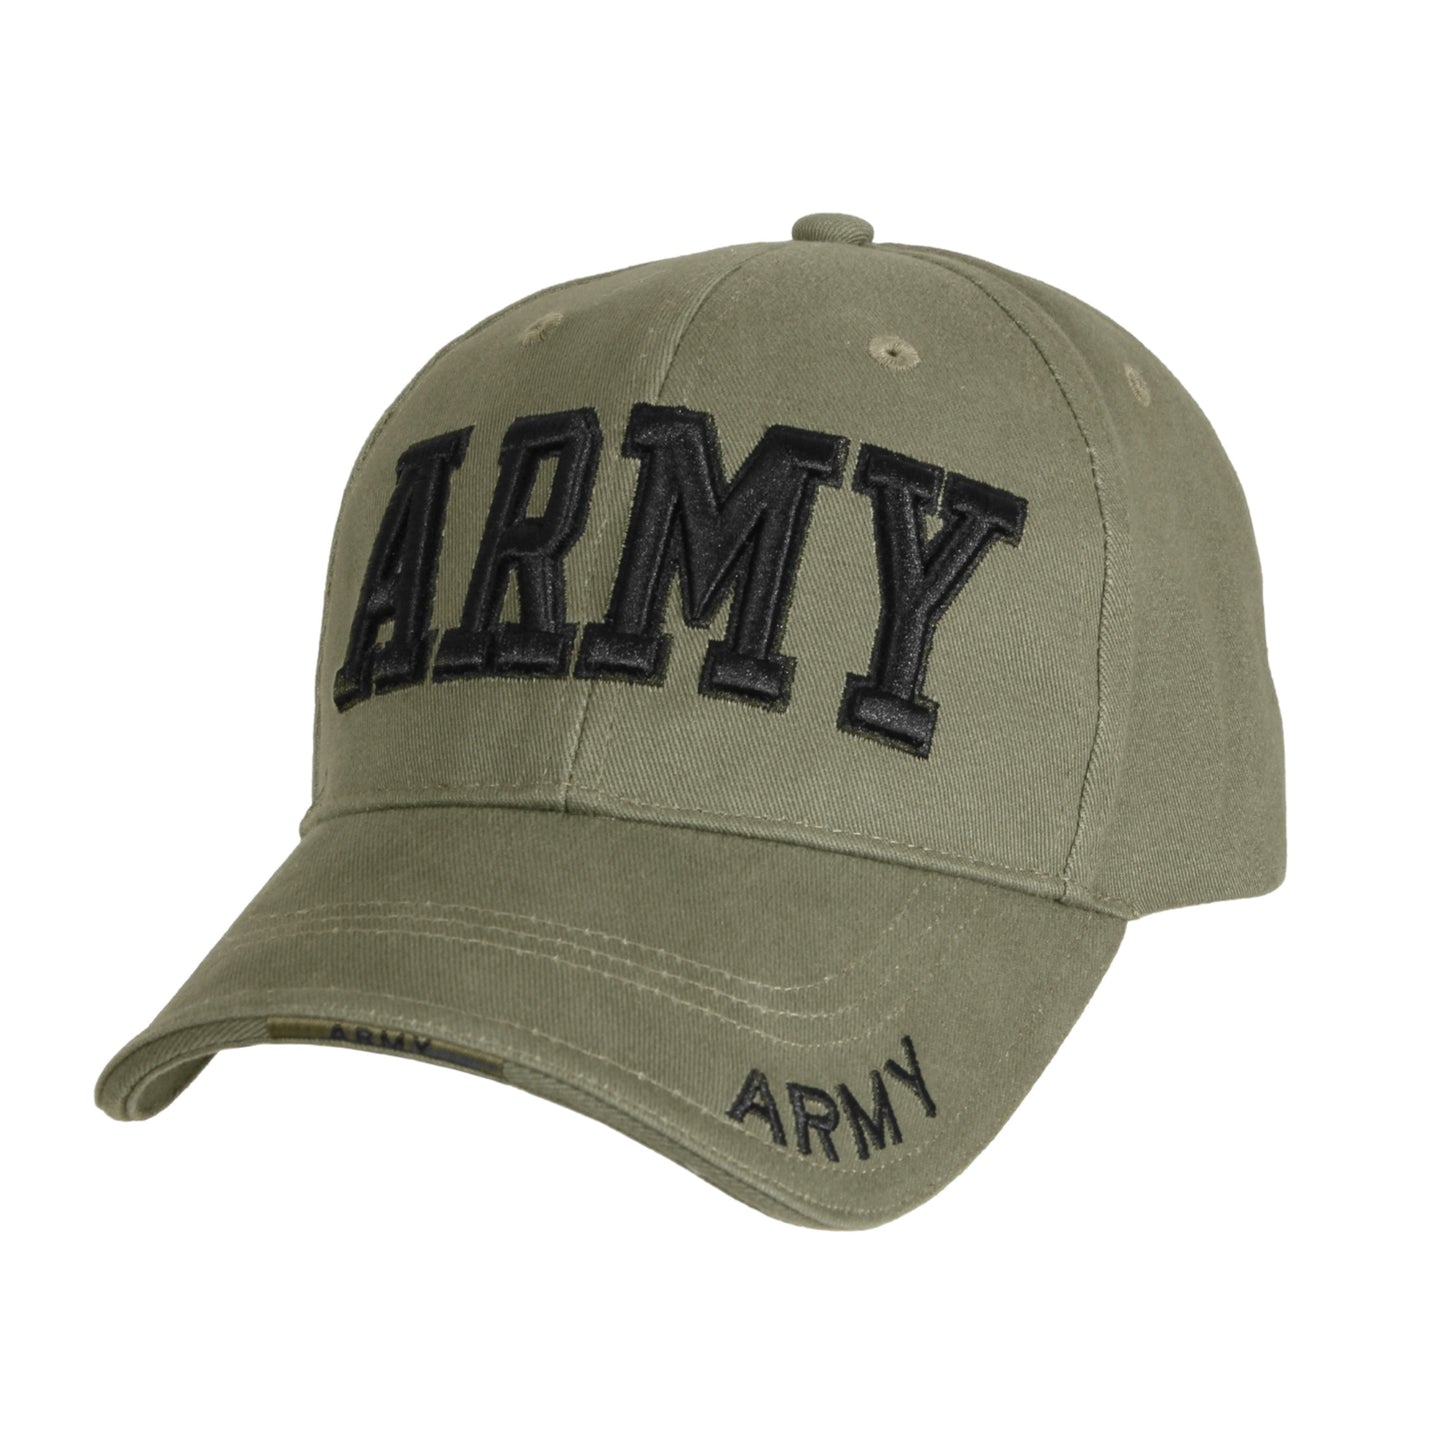 Rothco Deluxe Army Embroidered Low Profile Insignia Cap Military Army Hat